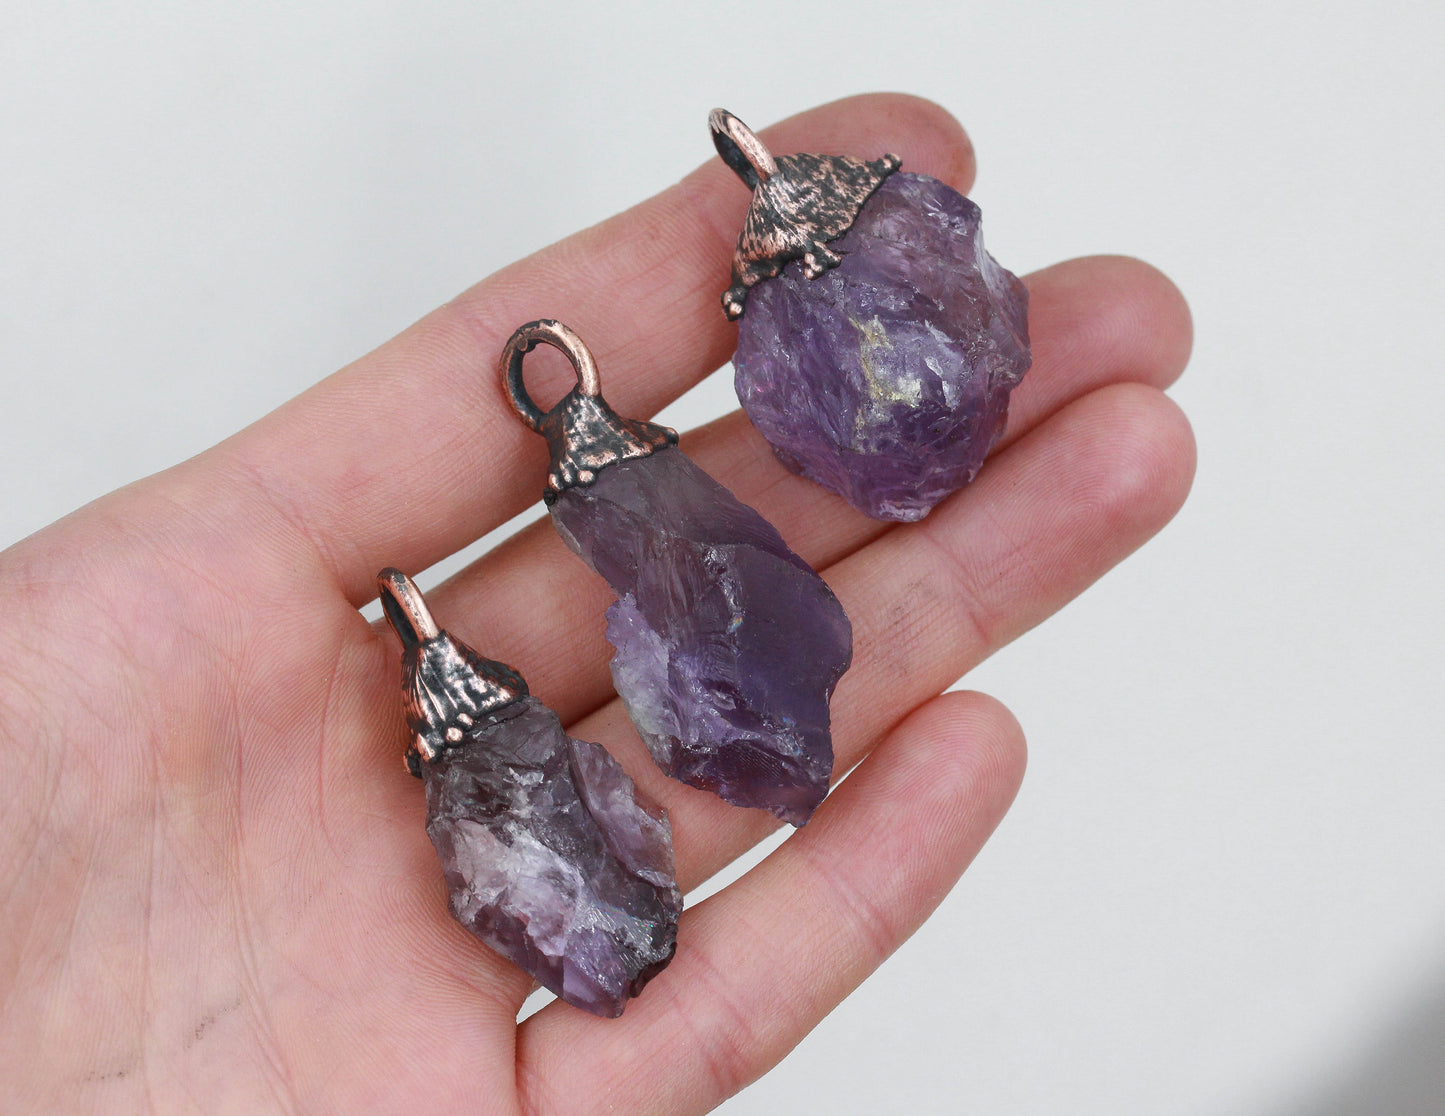 Small Amethyst Crystal Necklace